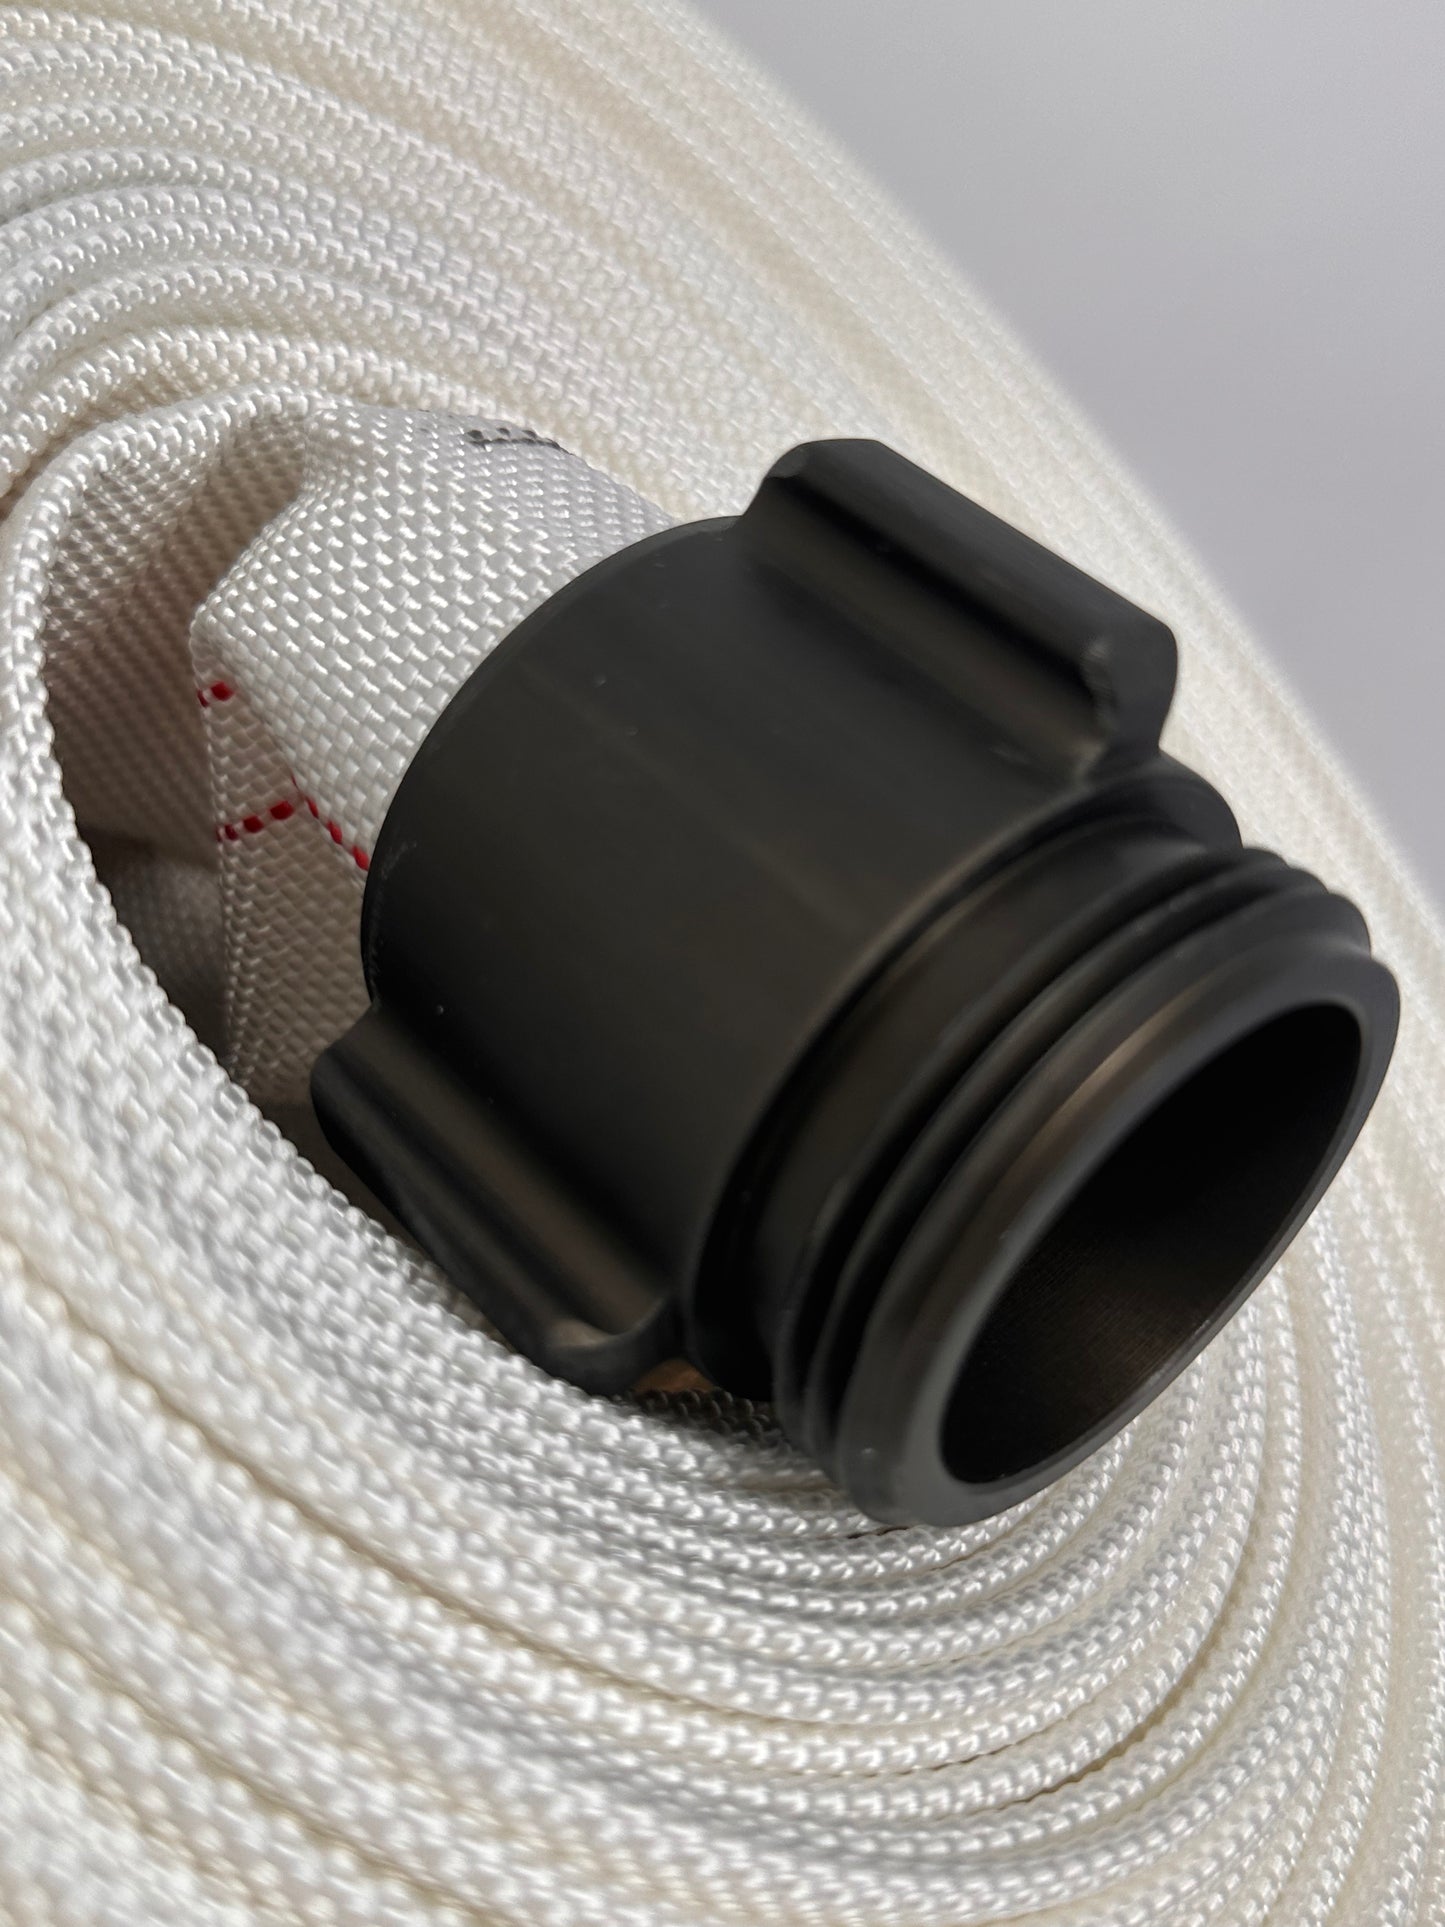 High Quality Home Defense Fire Hose
new improved, Pyro-Lite Aluminum Couplings, 75' x 1.5" TPU Lining, FM Approved.